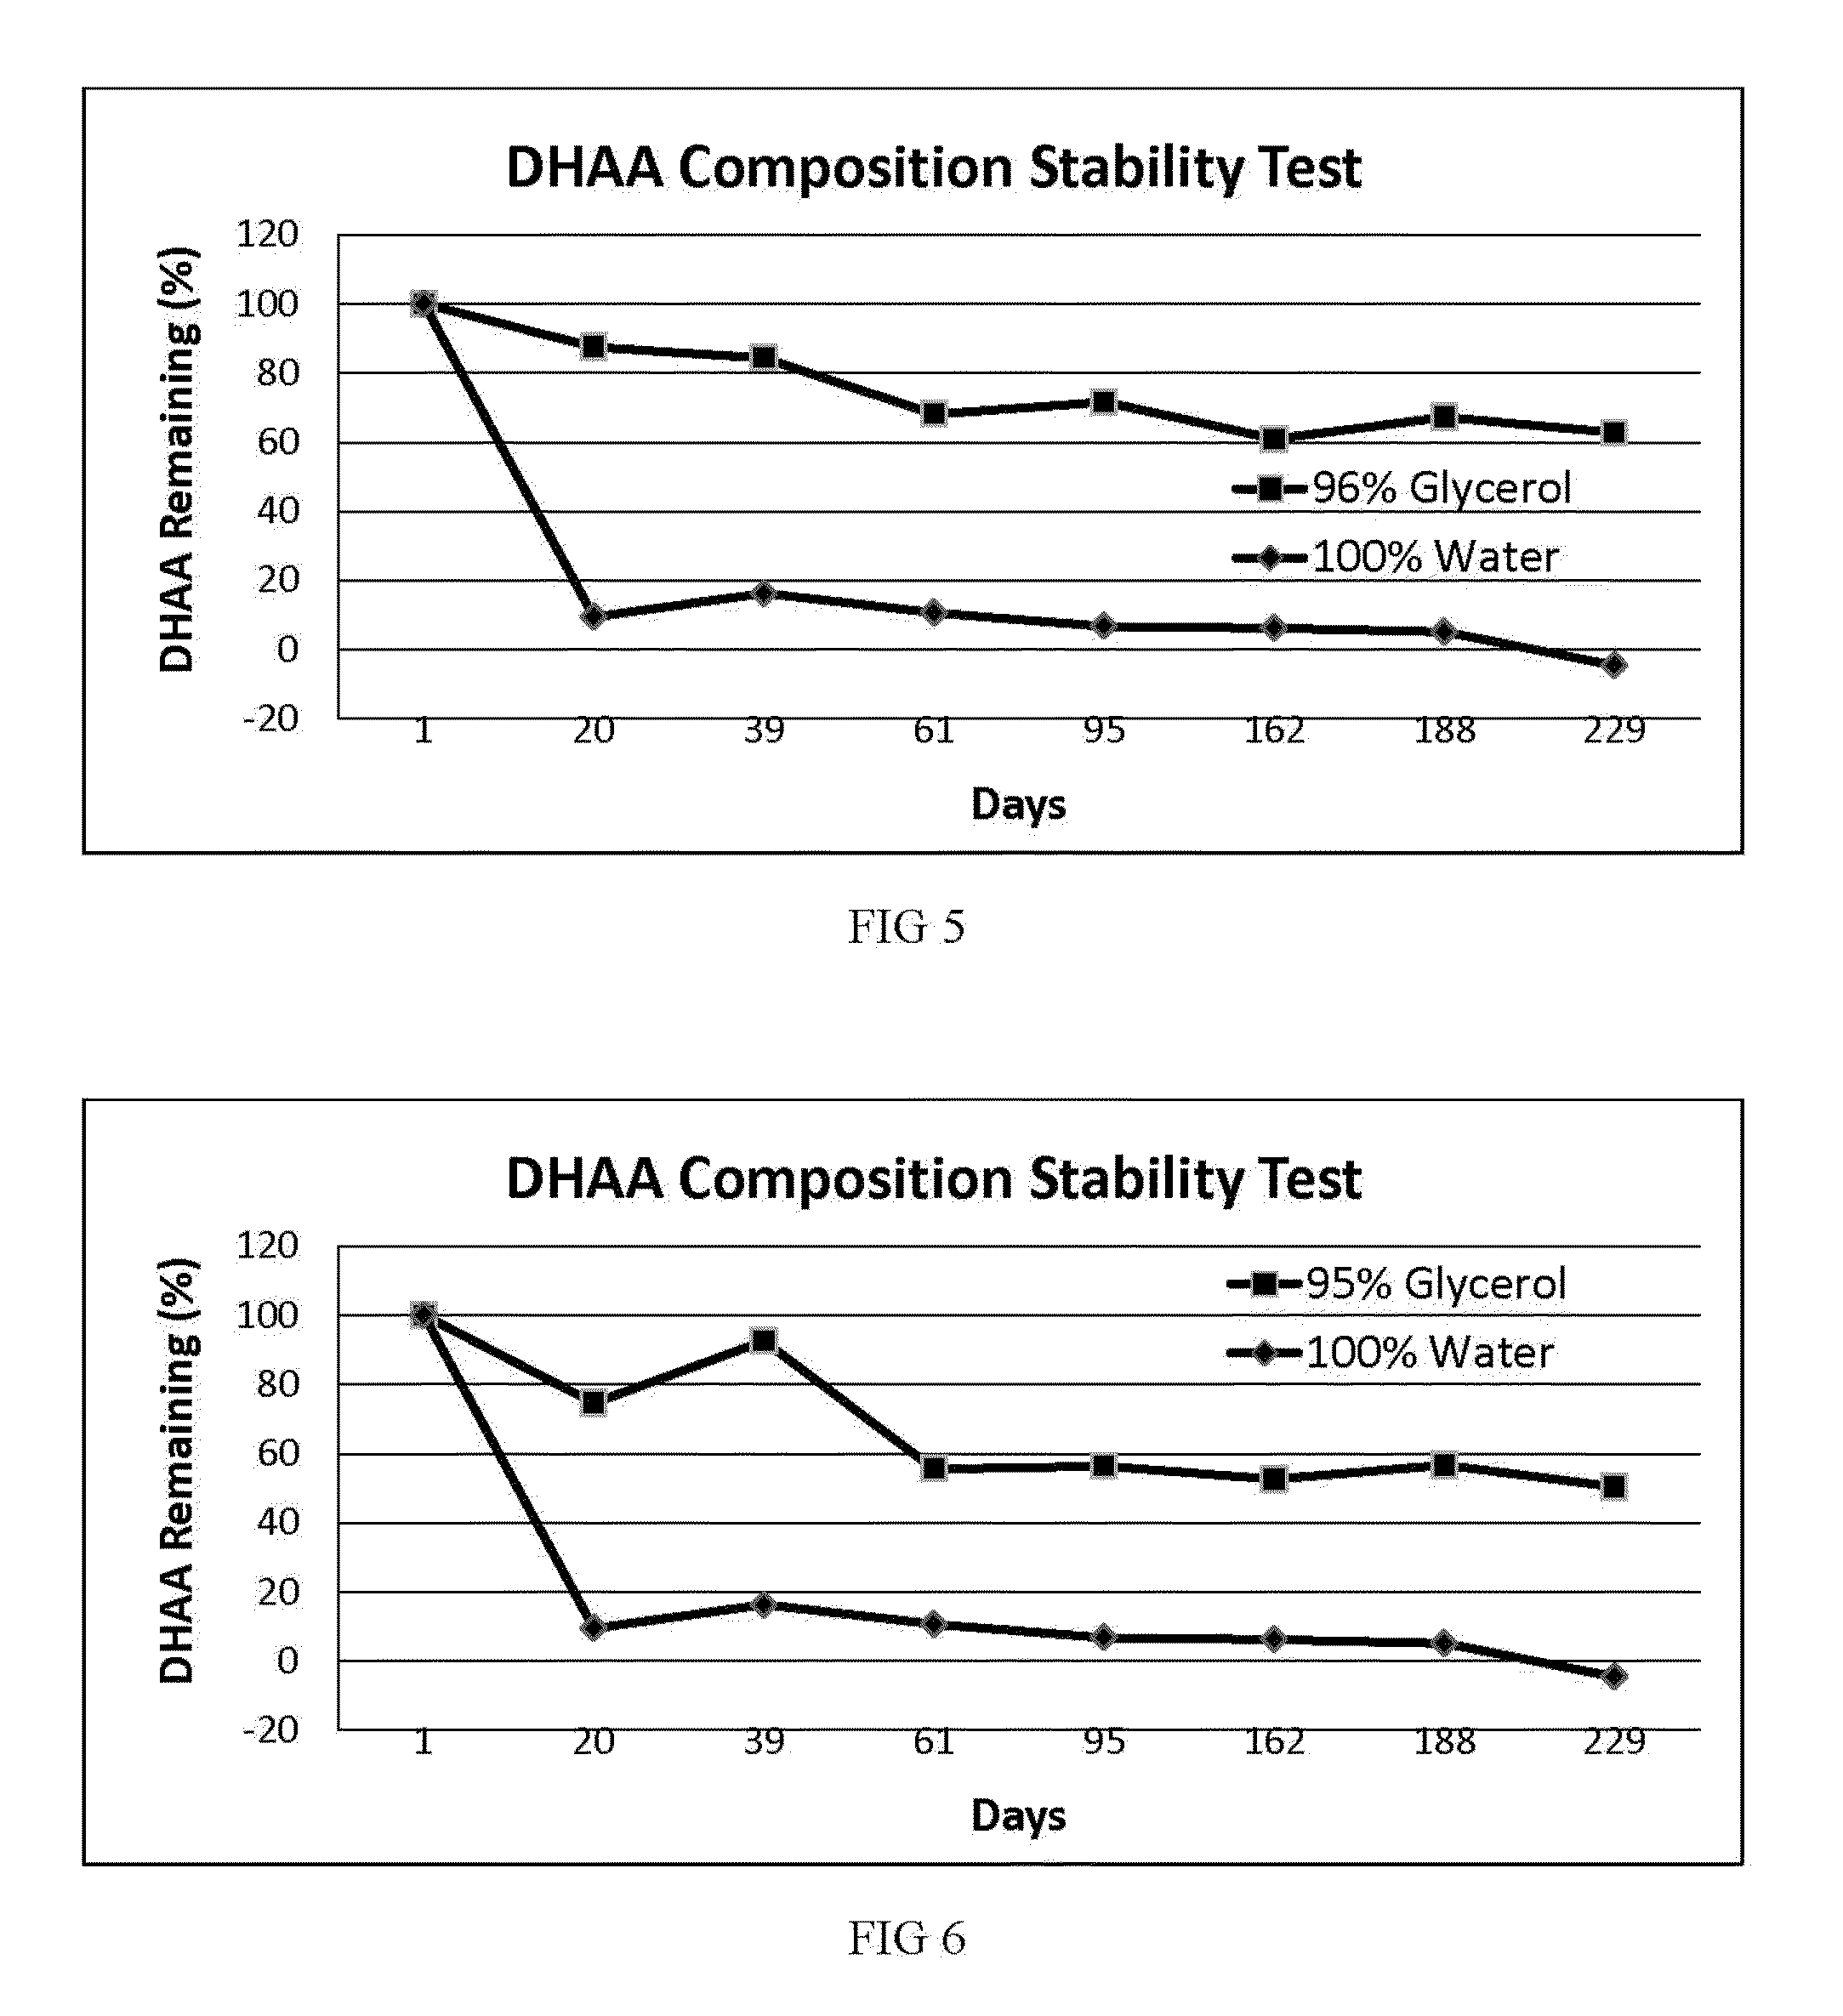 Stable compositions of dehydroascorbic acid